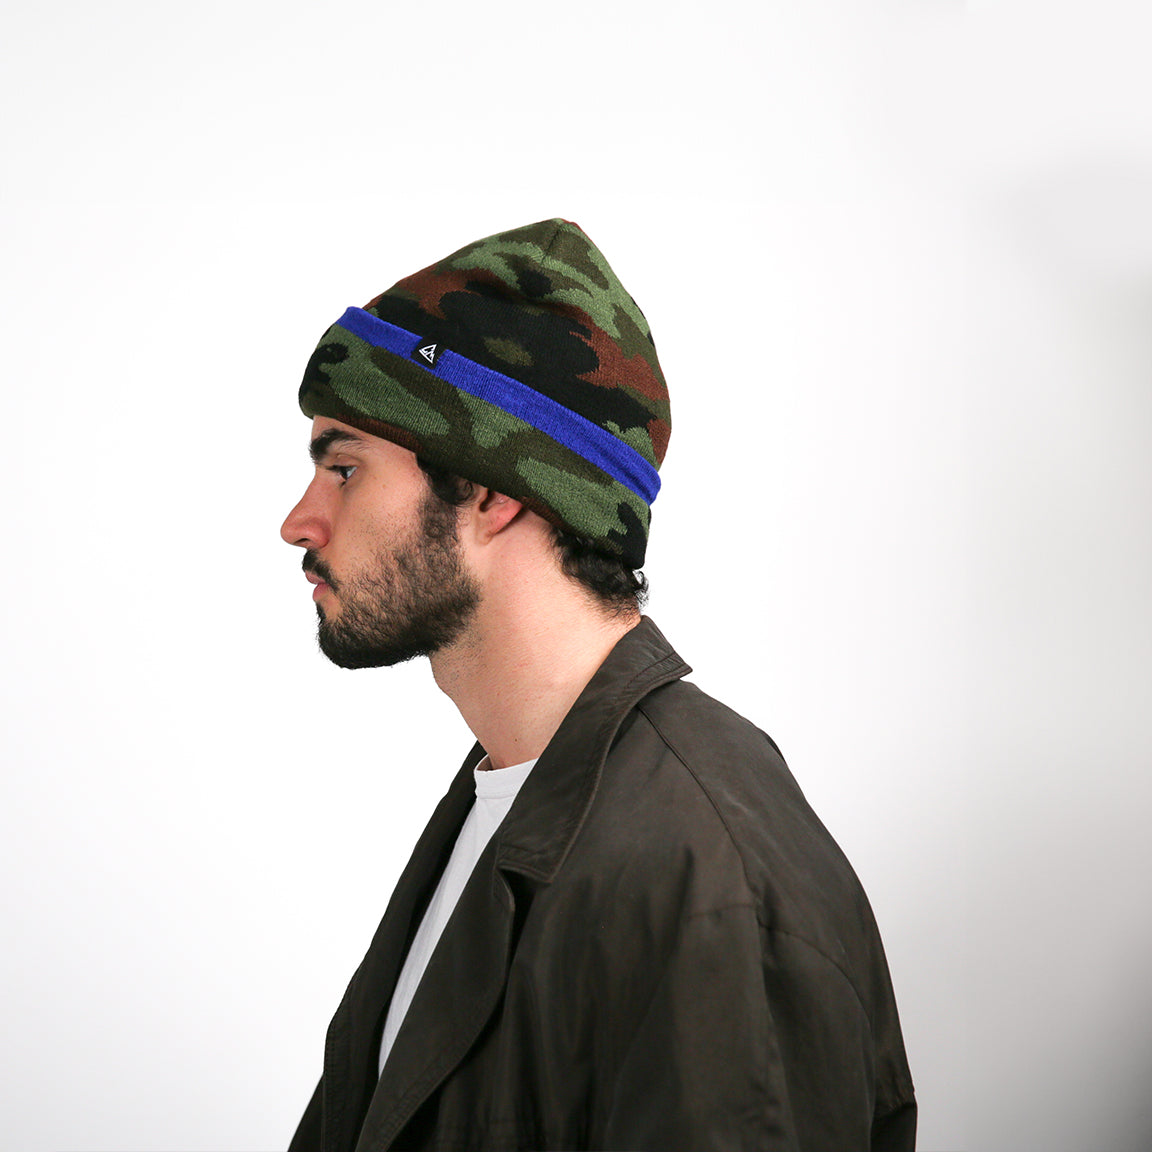 A beanie is viewed from the side. The bright blue stripe runs horizontally around the head, standing out against the dark camouflage pattern. The logo is also visible on the side. The beanie's fabric drapes softly to one side, maintaining its relaxed, slouchy look.